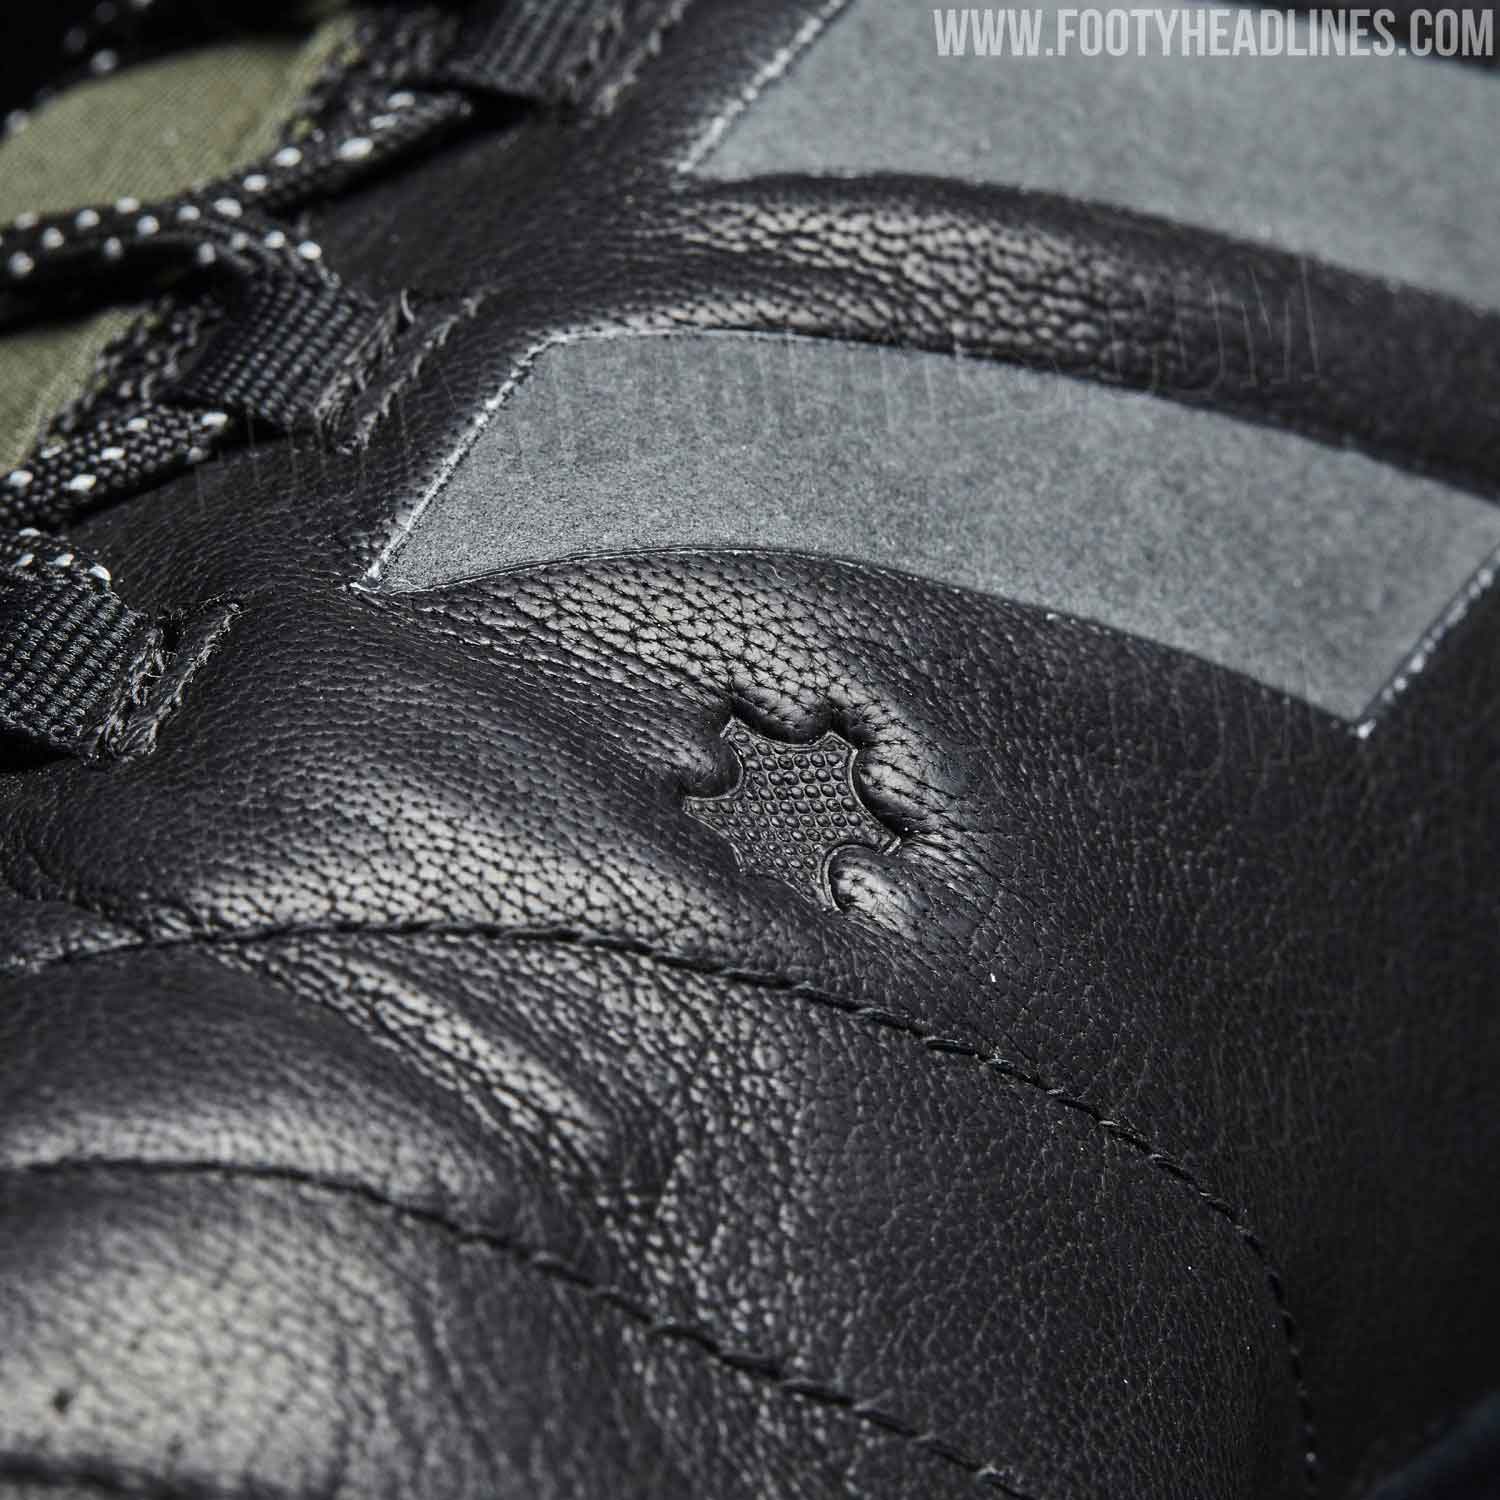 Exclusive: Adidas Copa 17 Mid Gore-Tex Football Boots Leaked - Footy ...